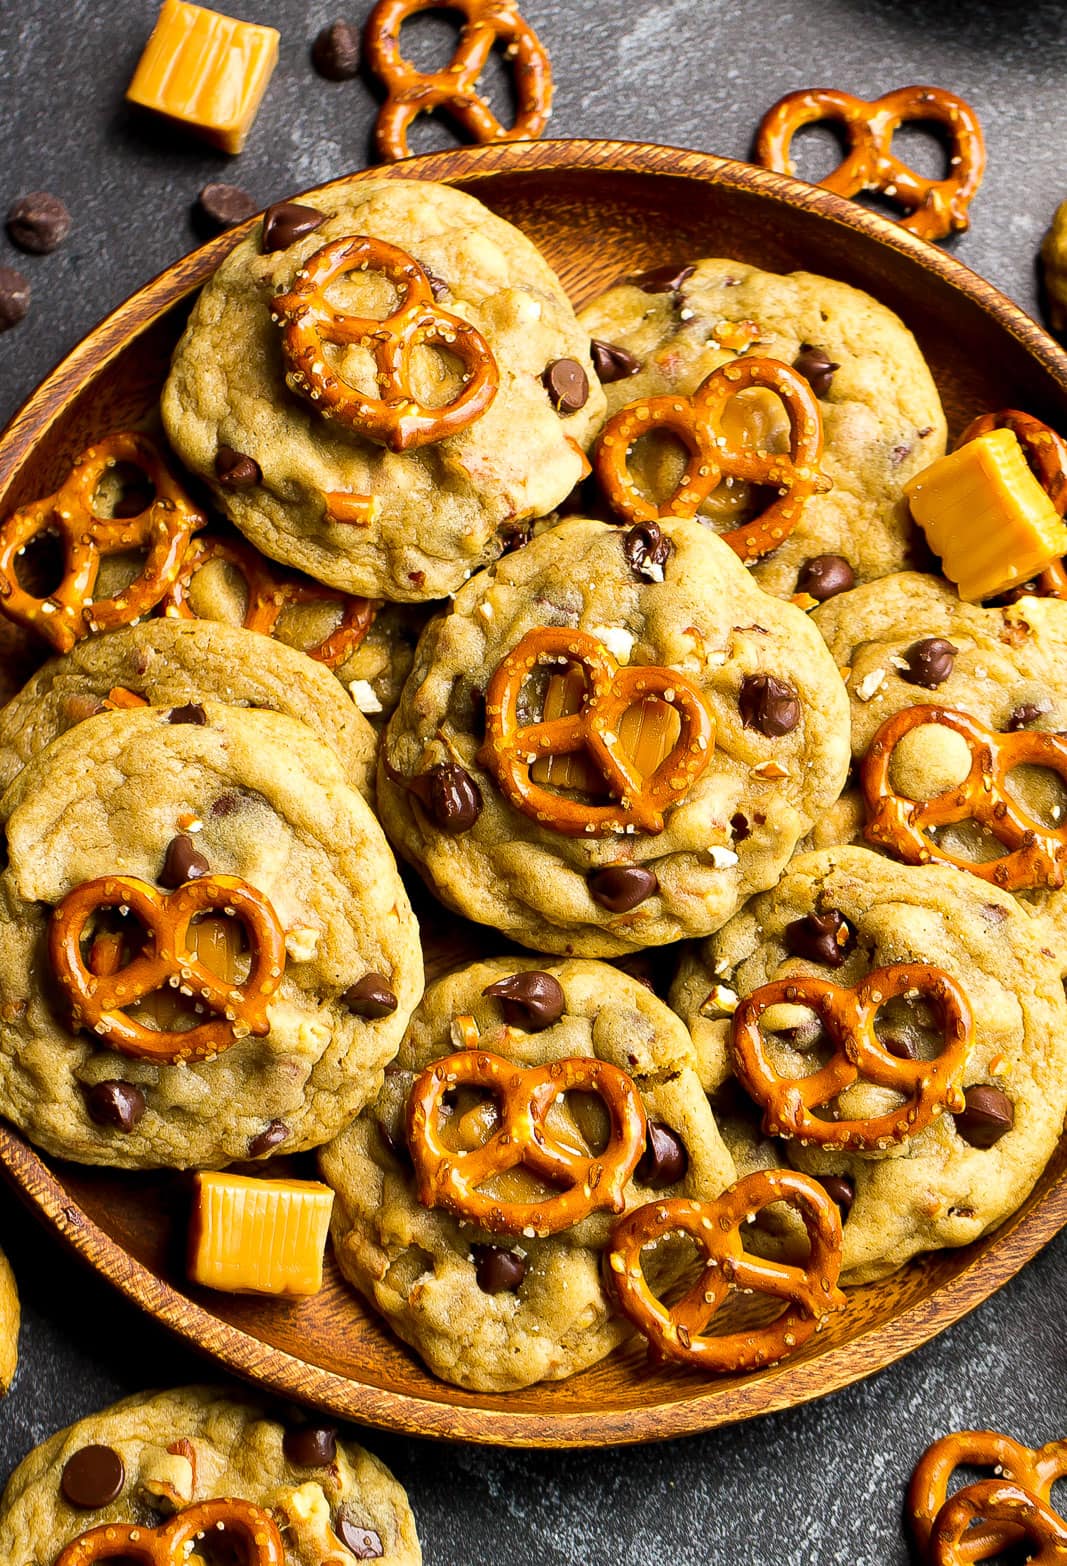 Large wooden plate full of Chocolate Chip Pretzel Cookies.